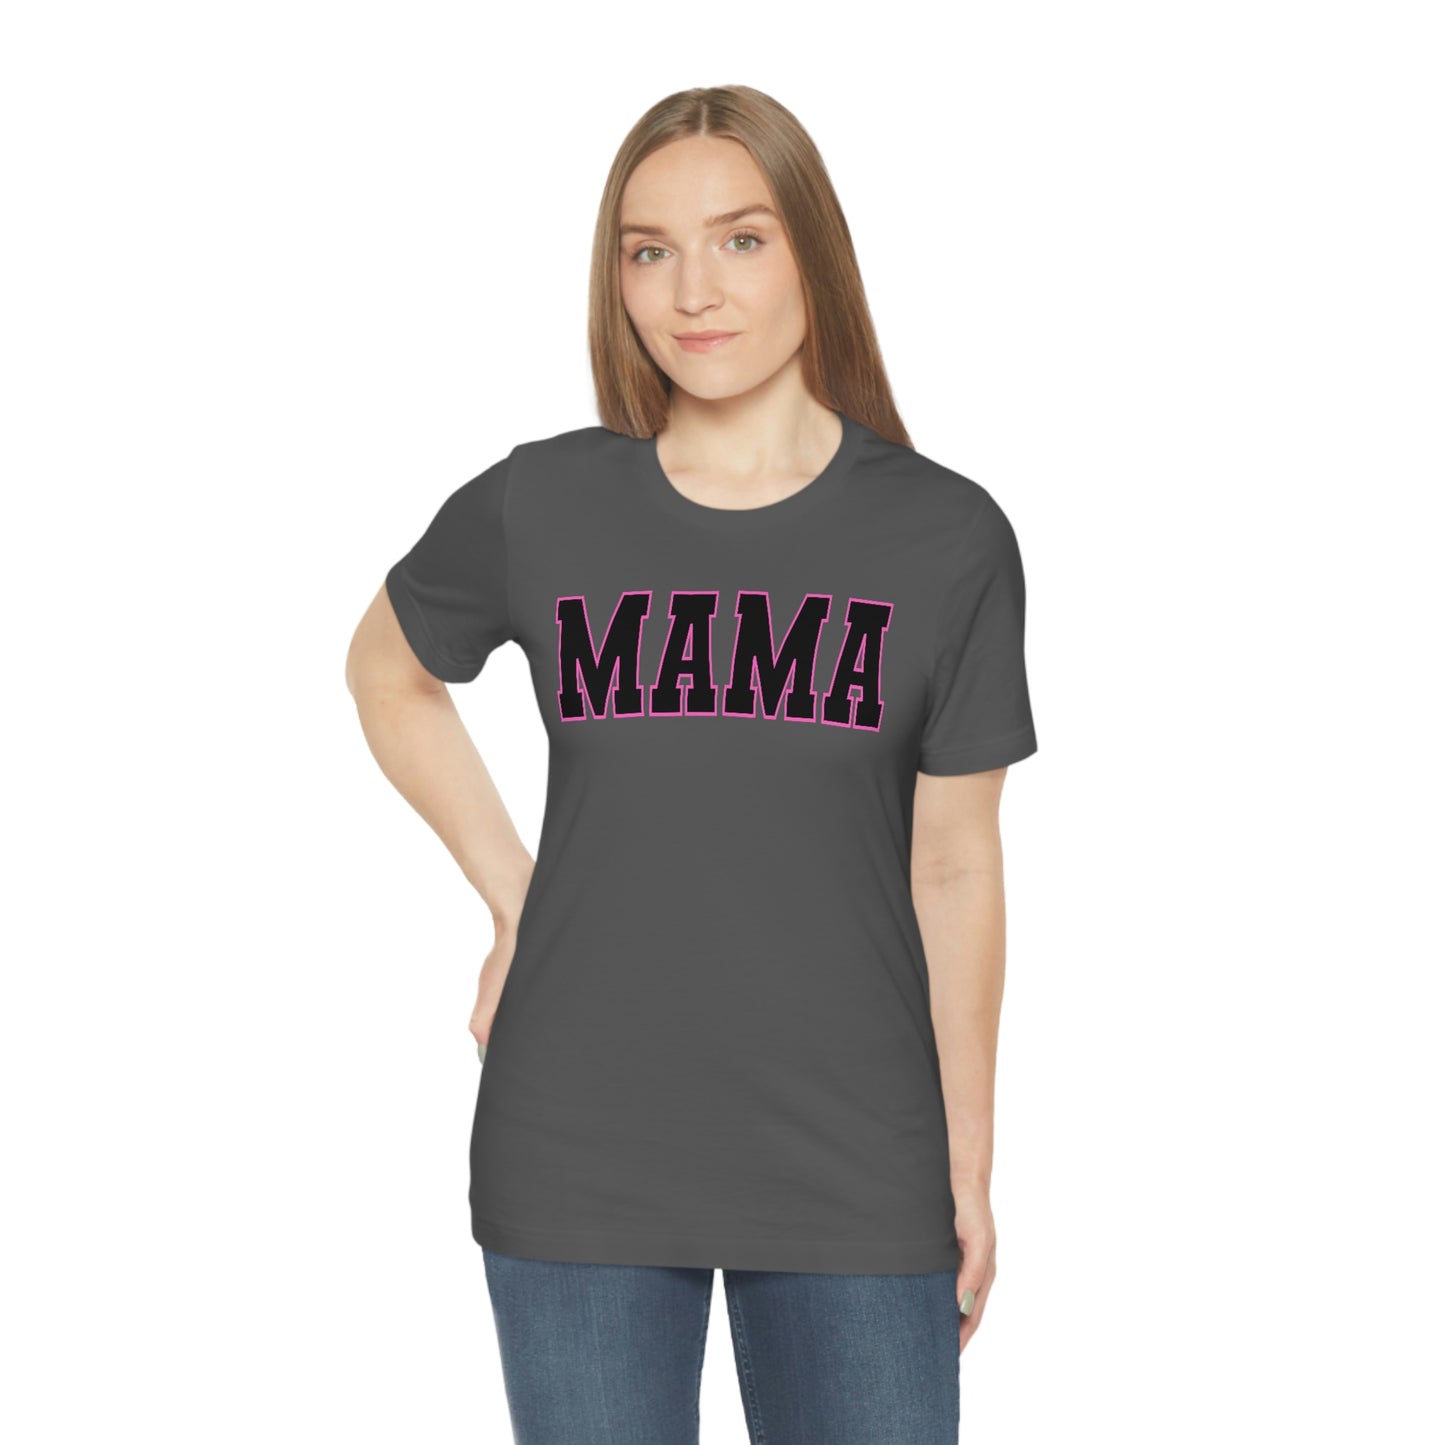 Cute Mama shirt mom shirt gift for her - mothers day shirt mothers day gift mom life shirt - retro mama shirt boy mama shirt mama t-shirt